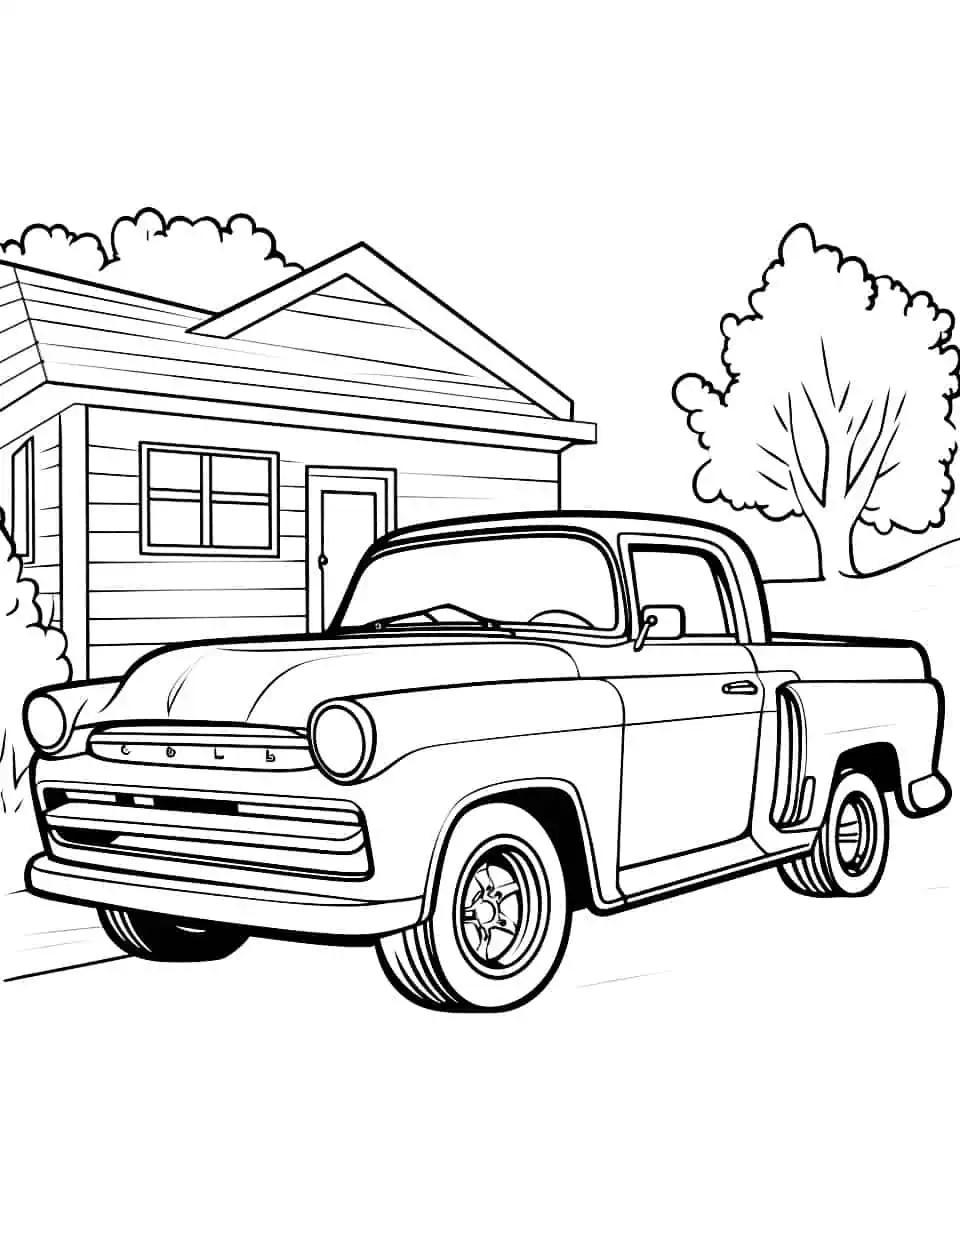 The Old Pickup Car Coloring Page - An old, classic truck design ready for a splash of color.